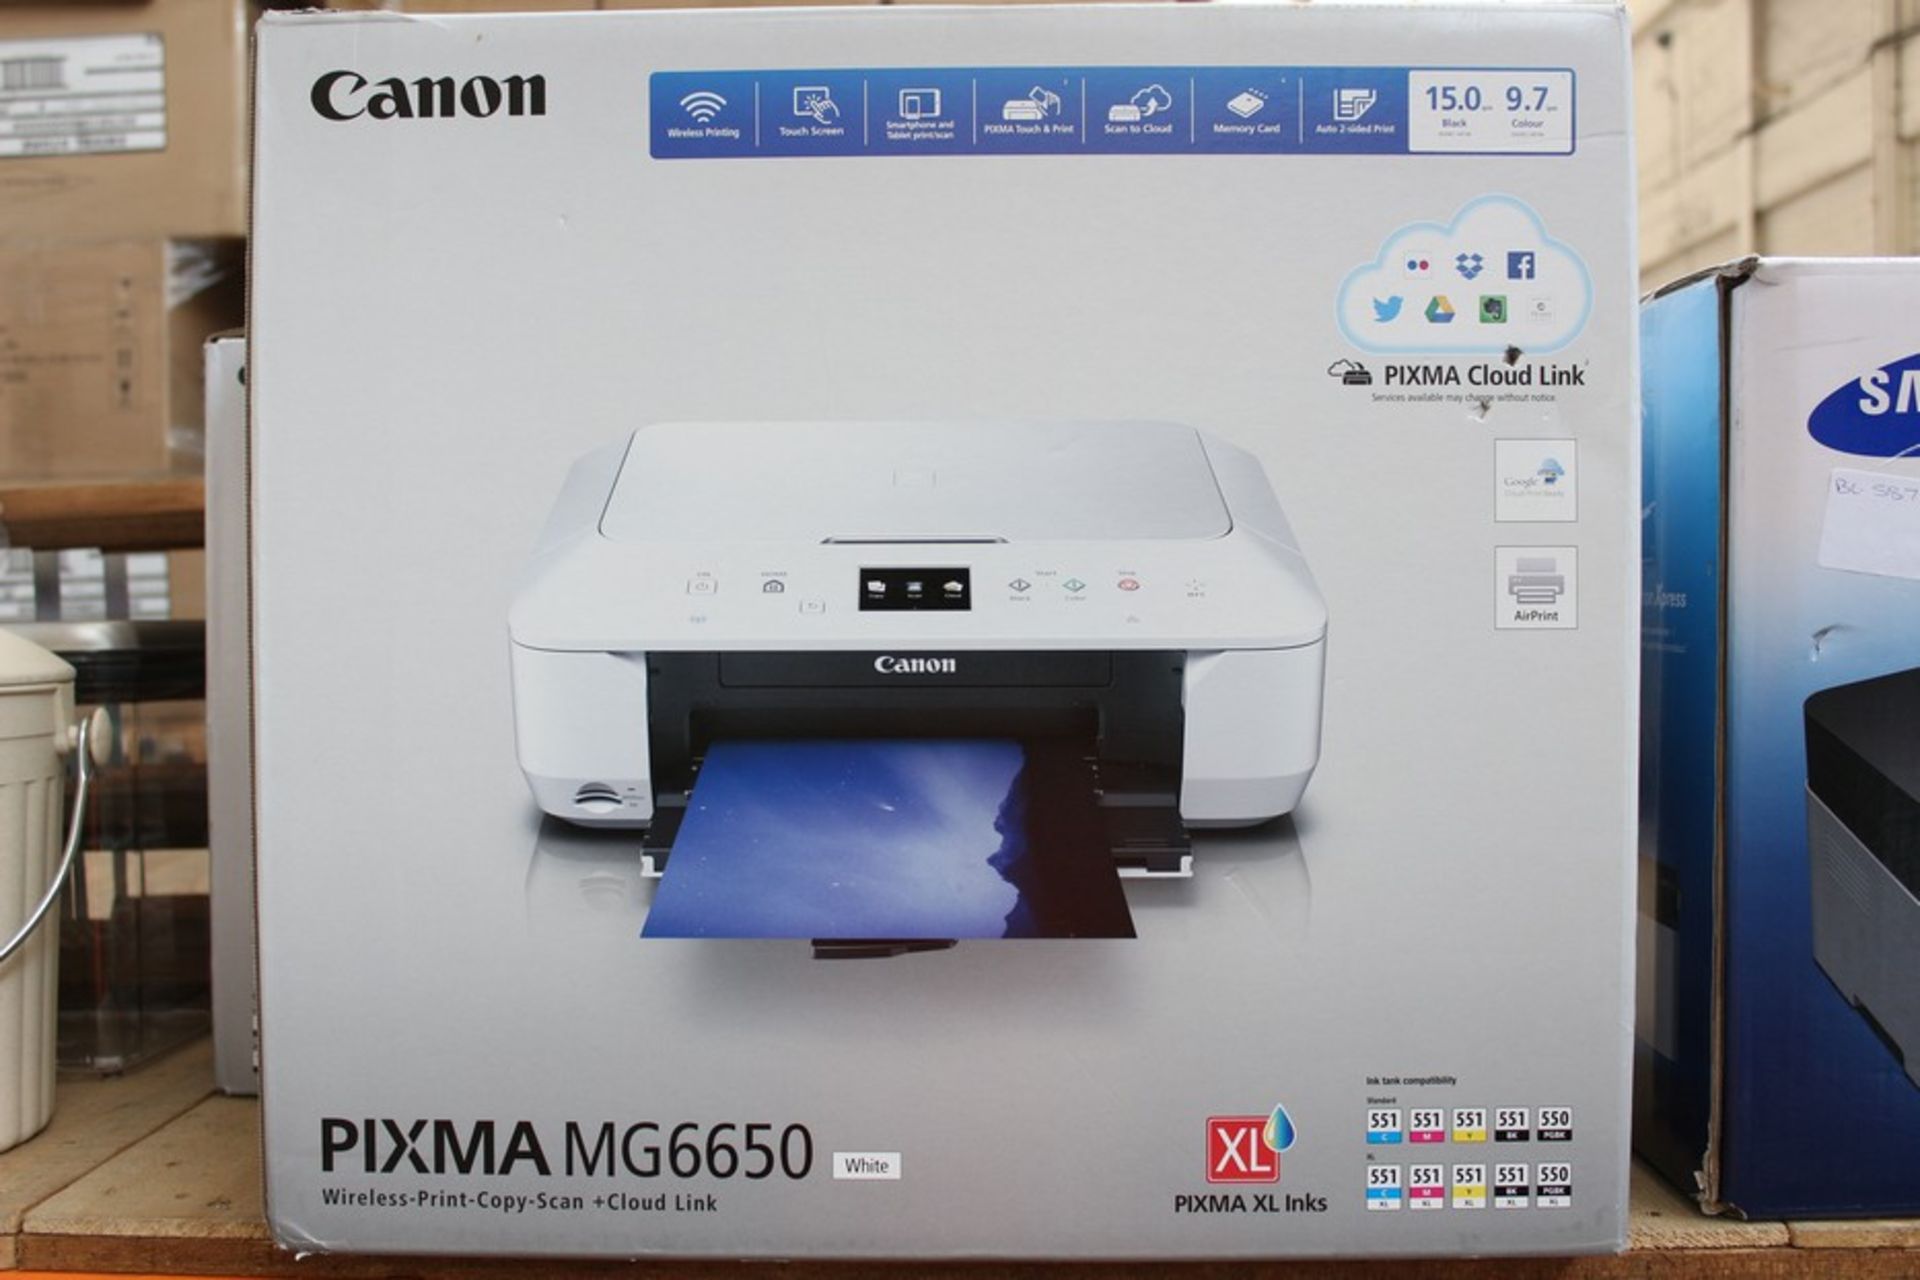 1 x BOXED CANON PIXMA MG6650 ALL IN ONE PRINTER SCANNER COPIER WITH WIFI (587069)  *PLEASE NOTE THAT